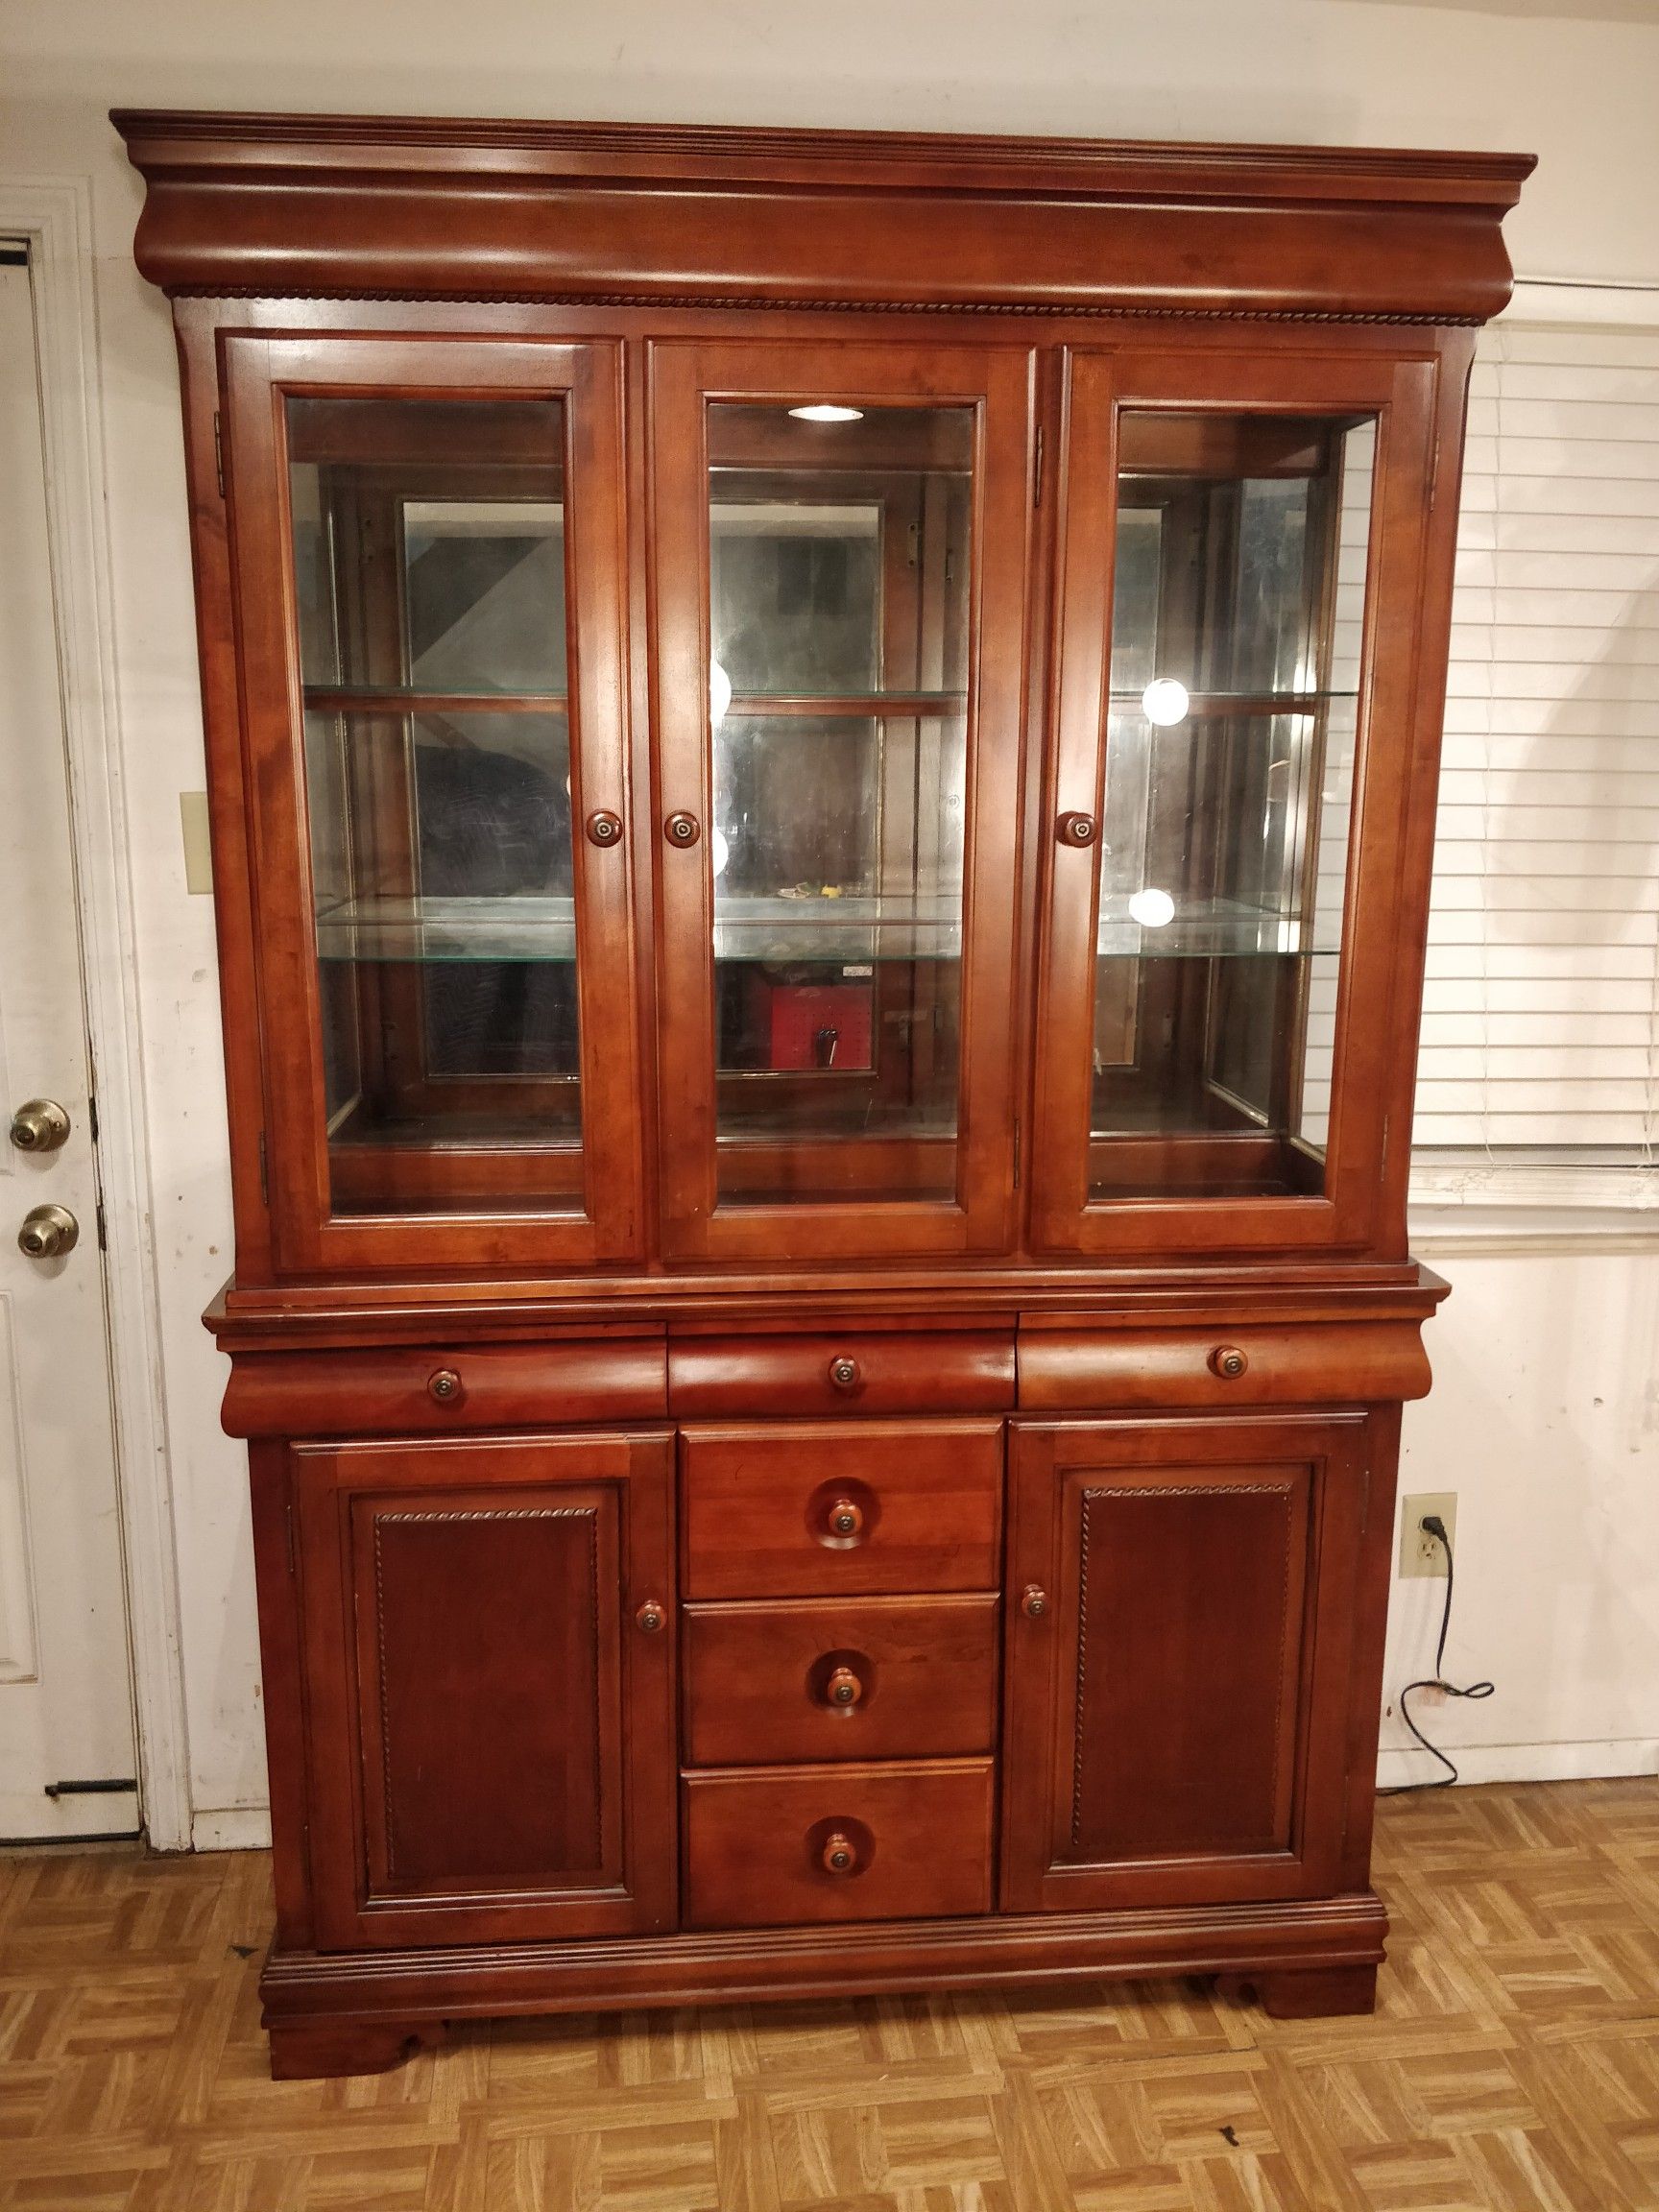 Solid wood 2 pieces China cabinet/TV stand/buffet with drawers, shelves & light in great condition, all drawers working well dovetail drawer